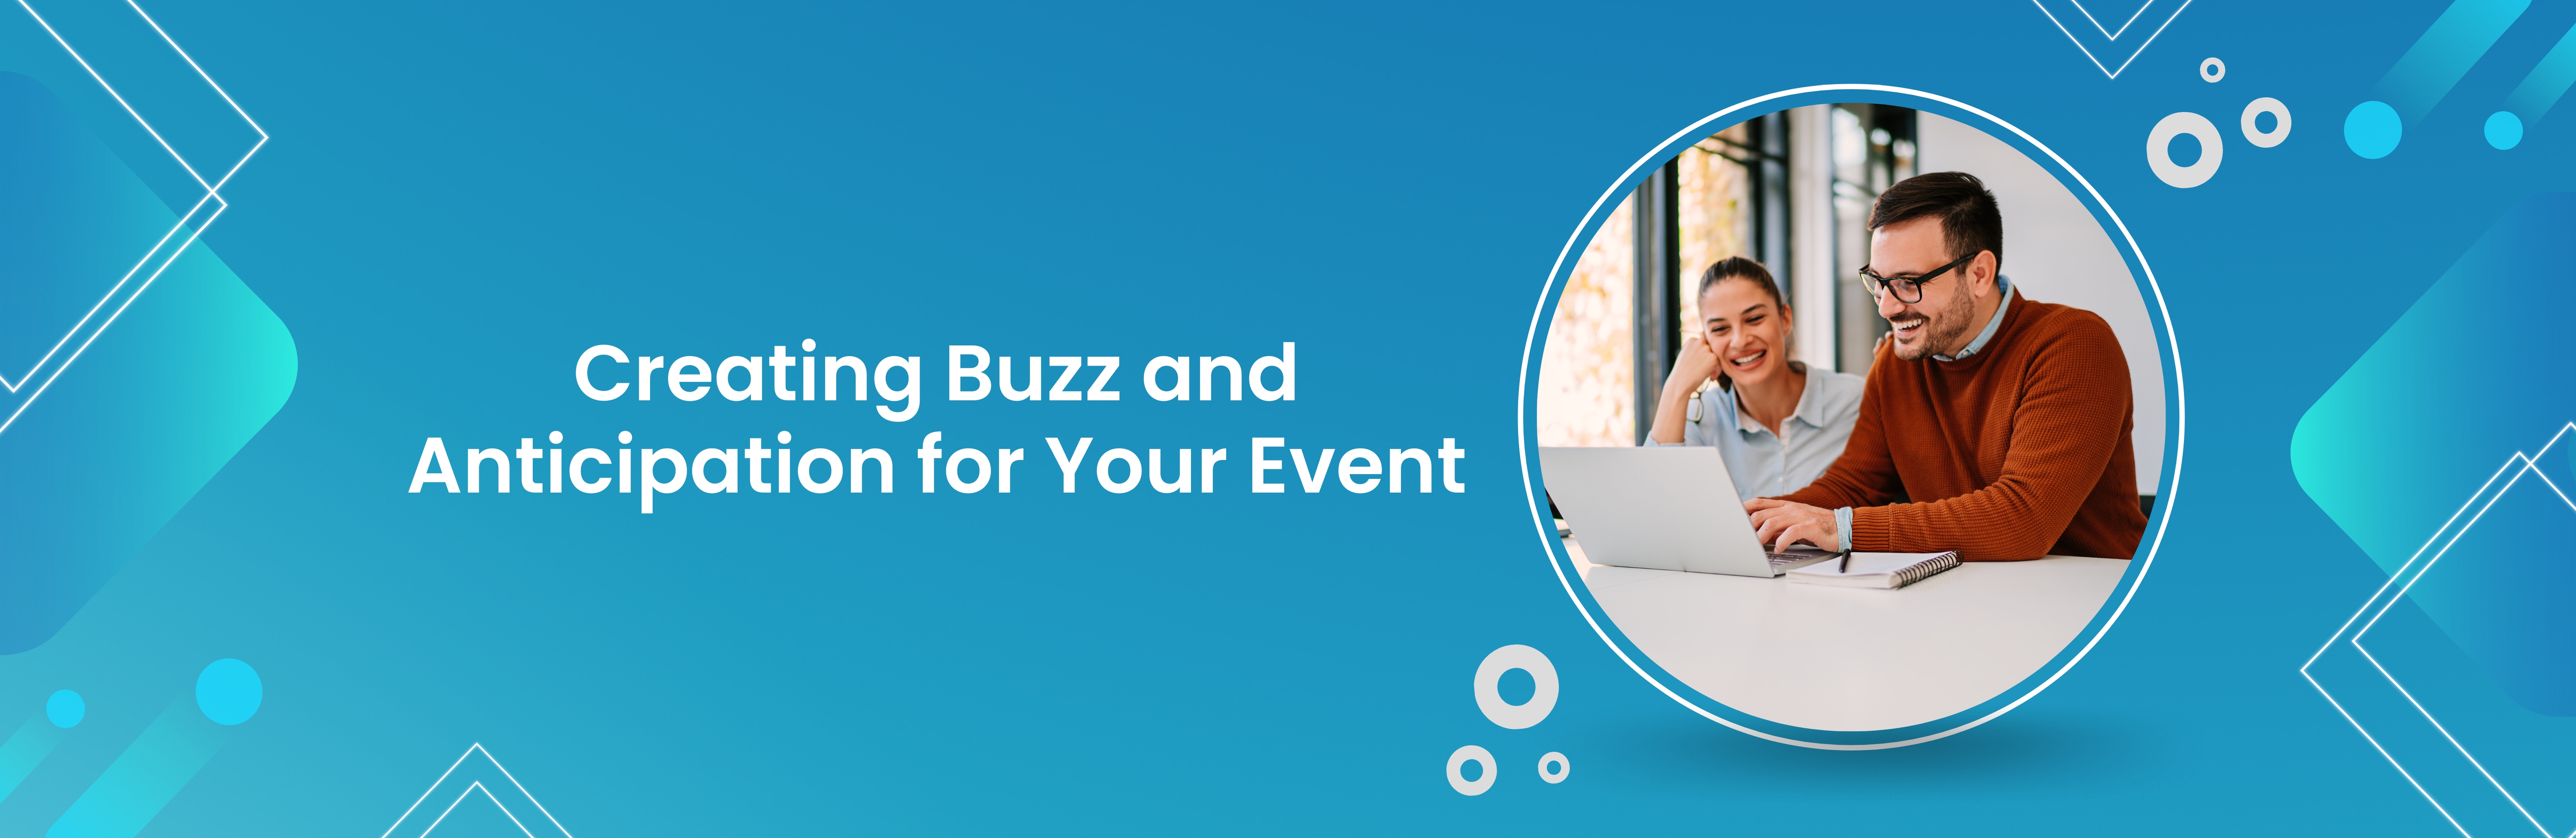 Creating Buzz and Anticipation for Your Event